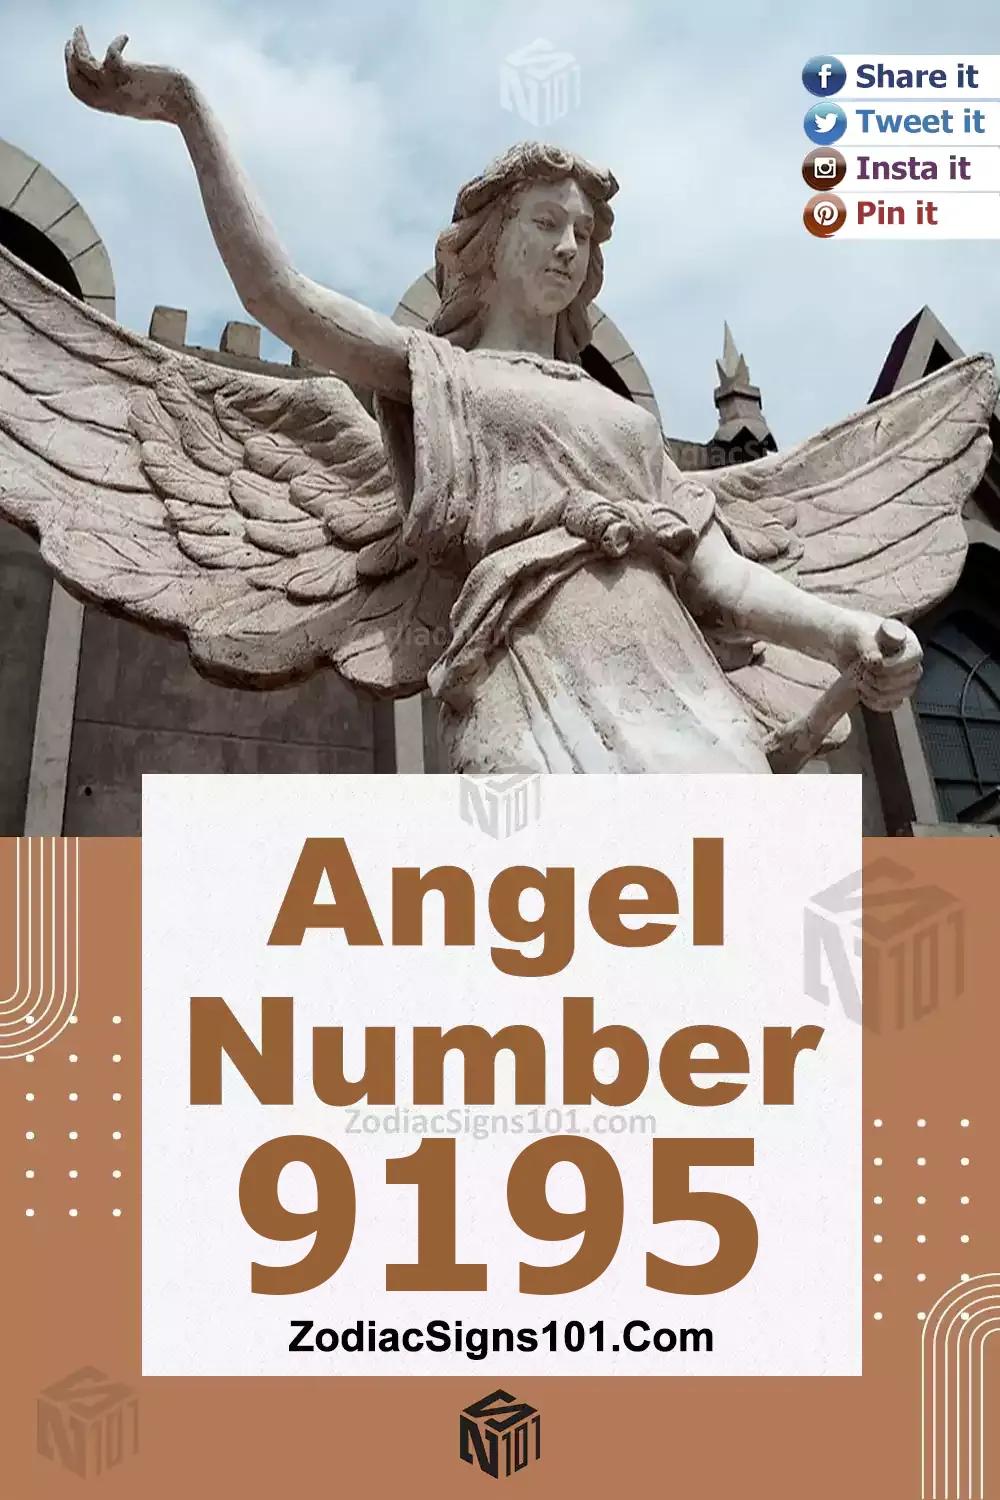 9195 Angel Number Meaning